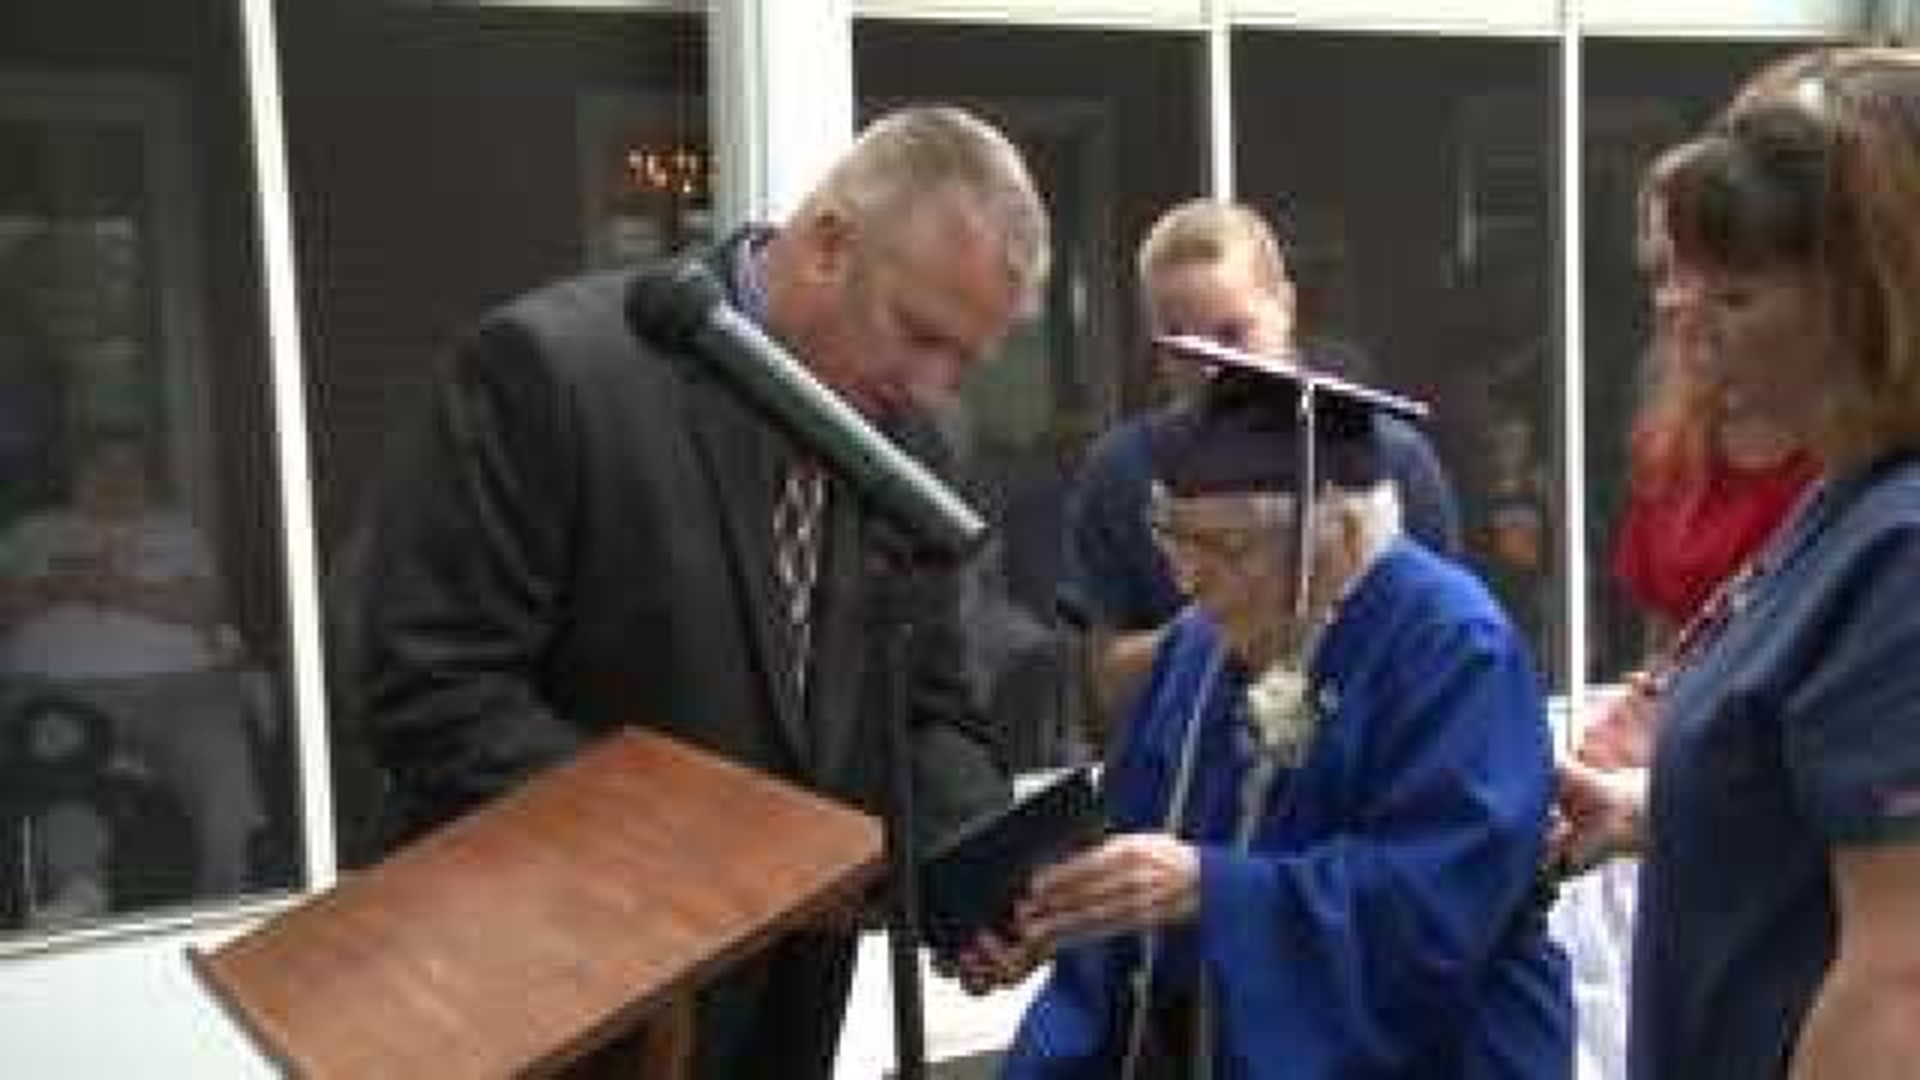 101 year old woman receives high school diploma